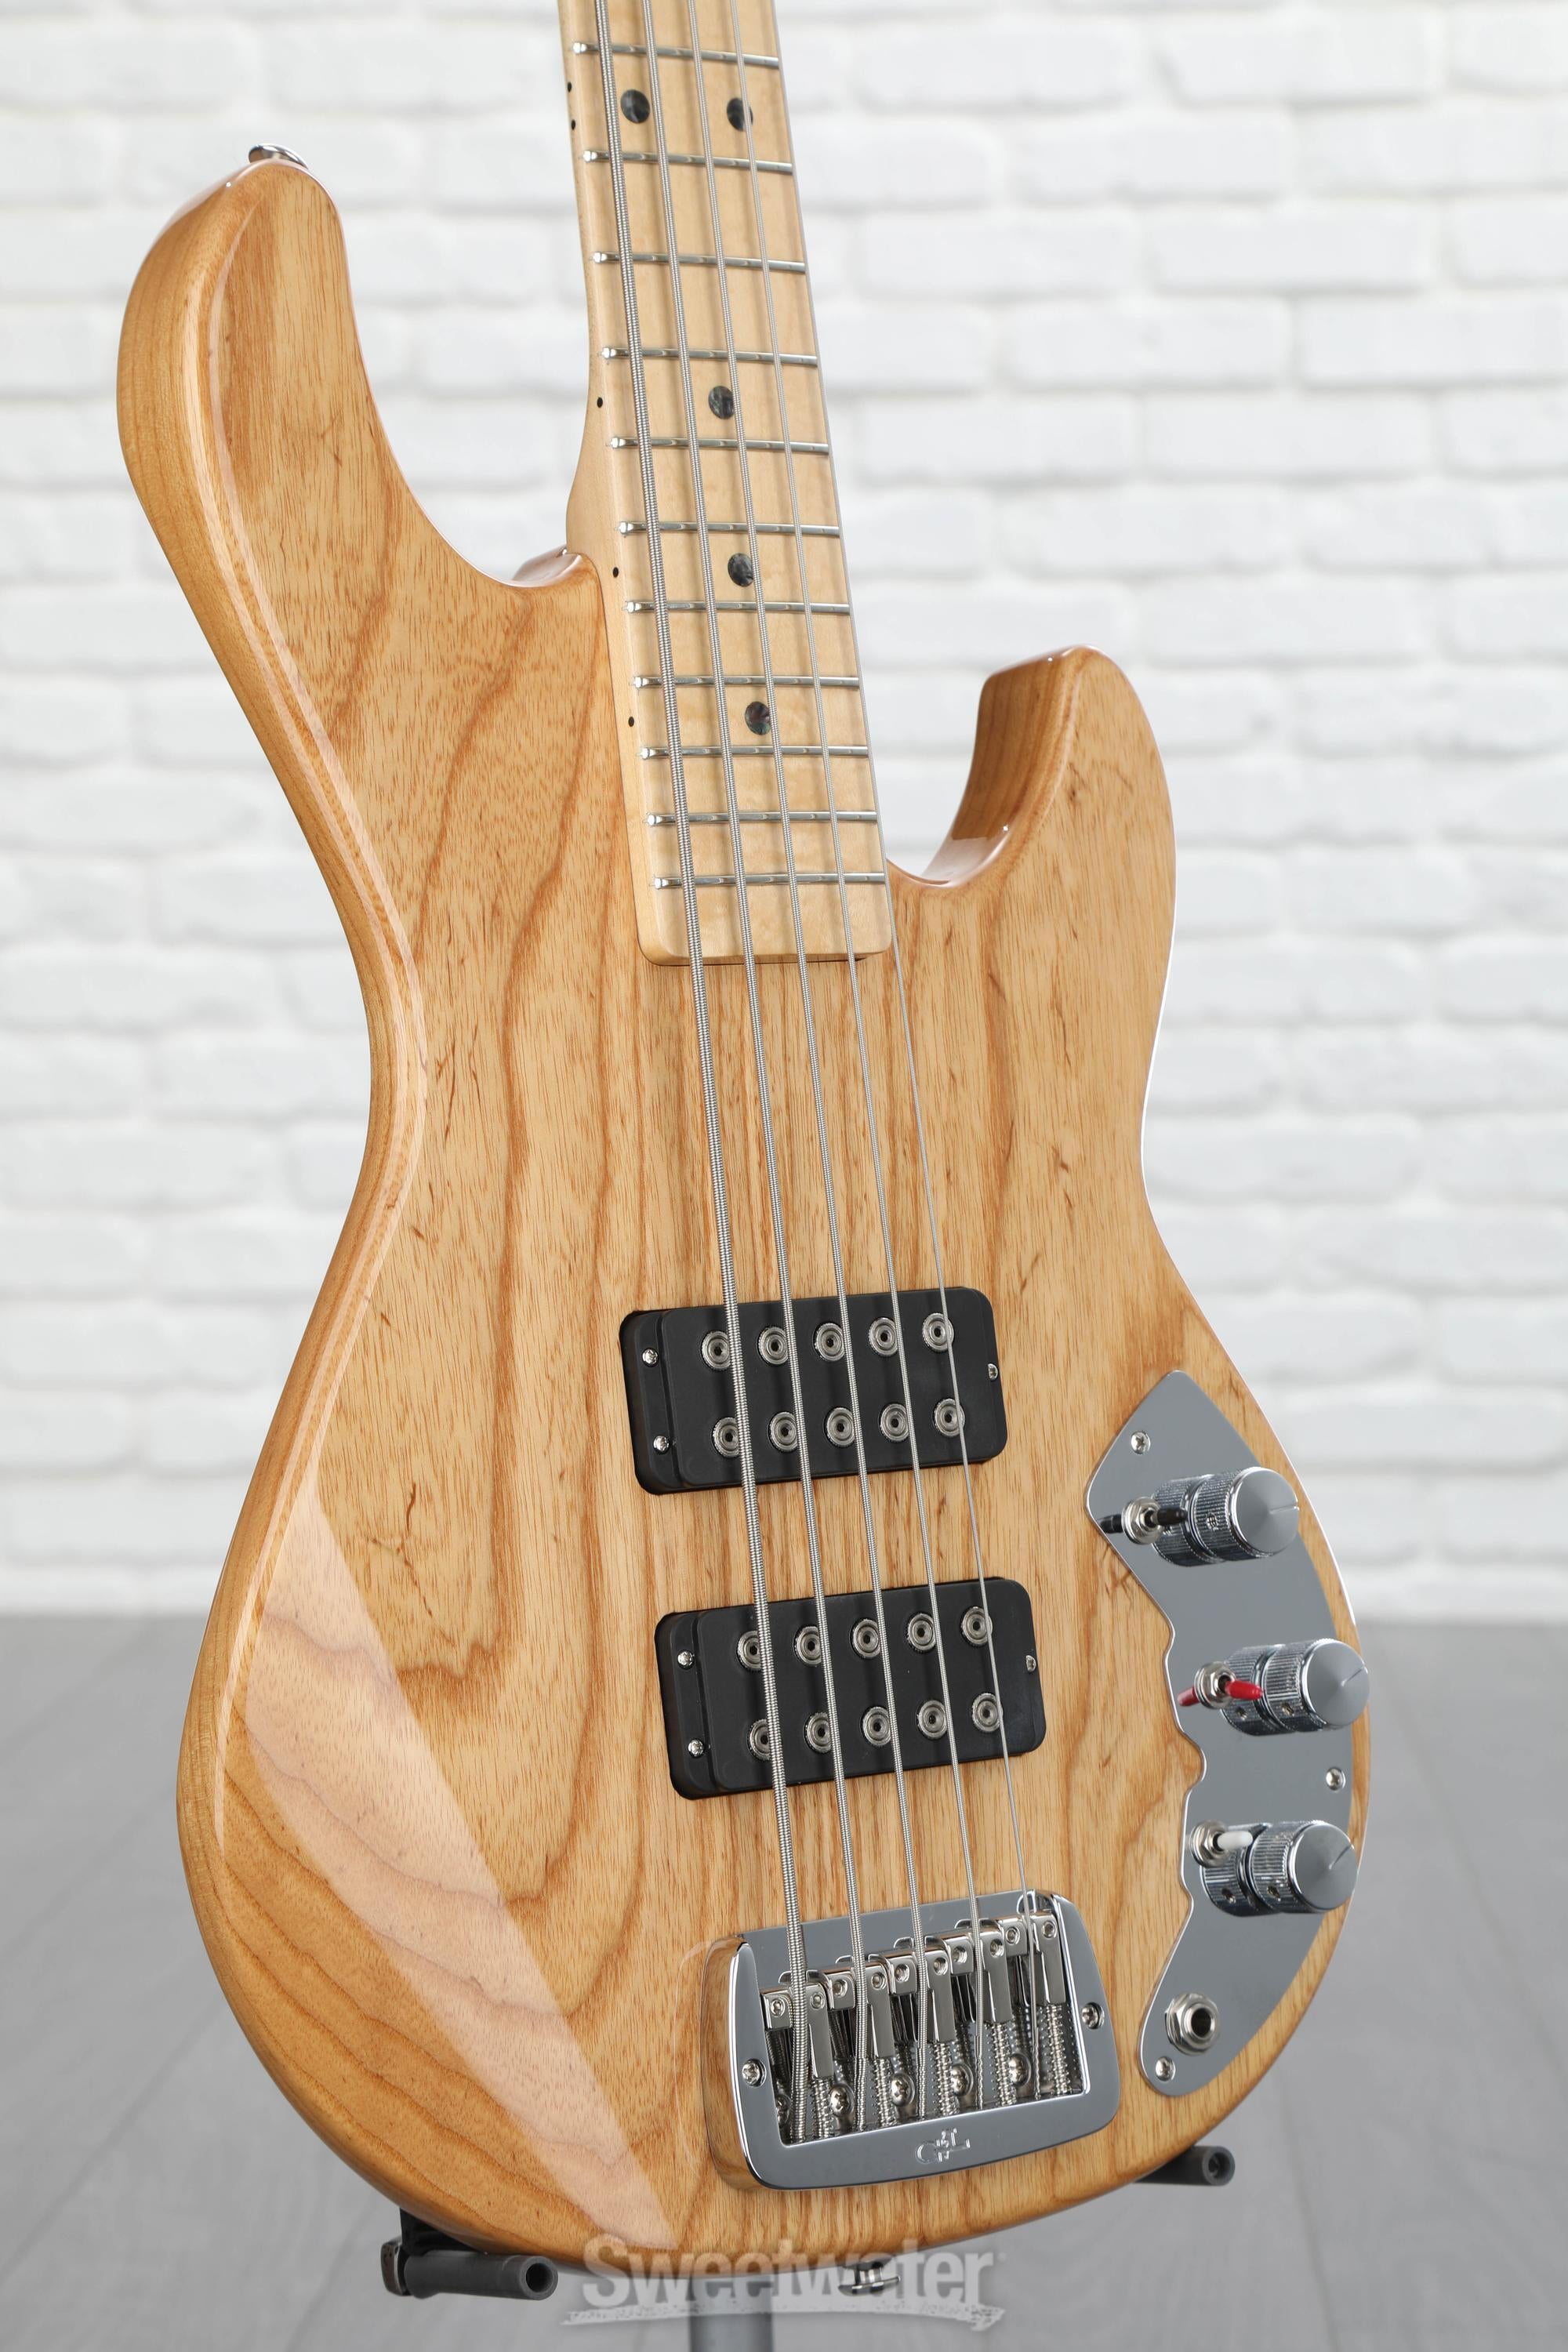 G&L CLF Research L-2500 Bass Guitar - Natural Ash | Sweetwater